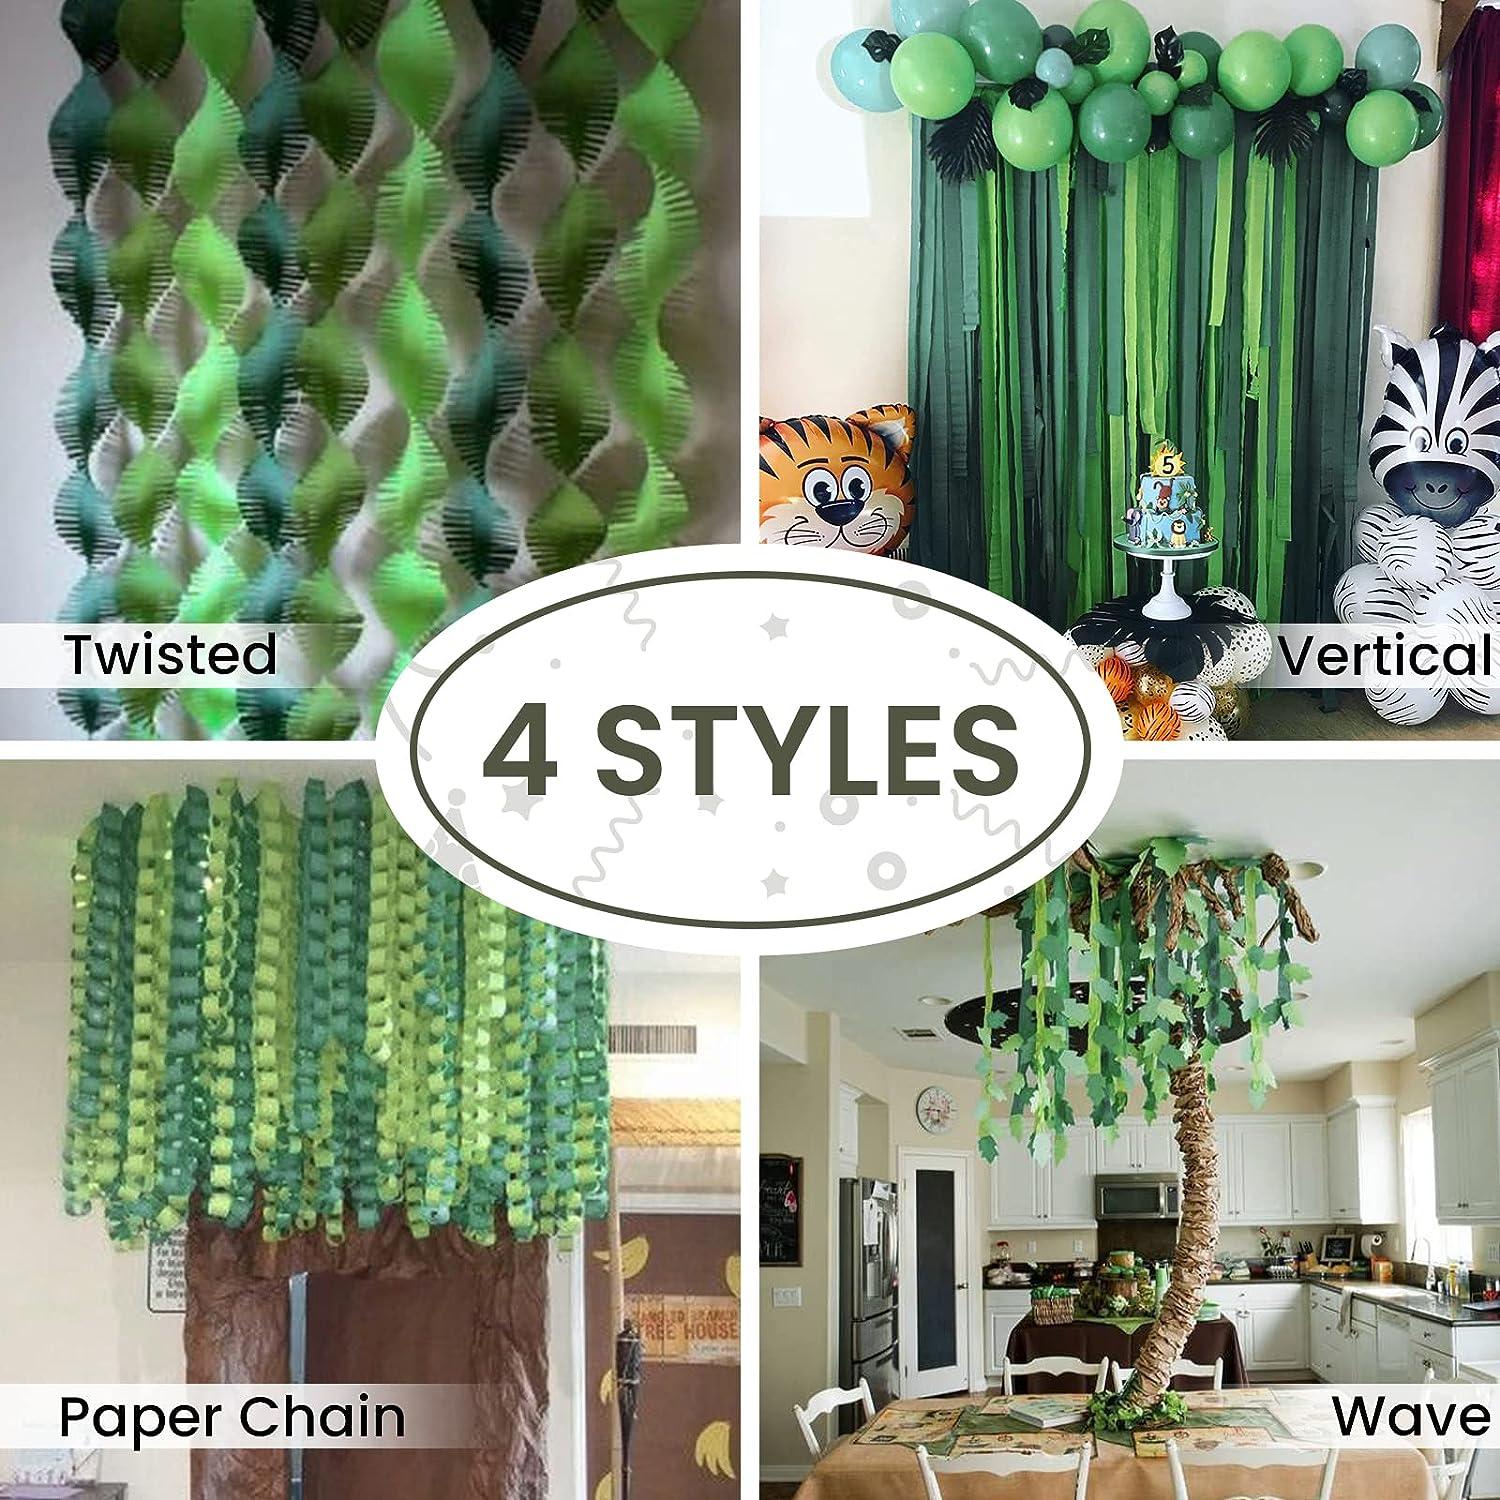 PartyWoo Crepe Paper Streamers 6 Rolls 492ft, Pack of Crepe Paper Streamers in Green and Gold, Crepe Paper for Birthday Decorations, Party